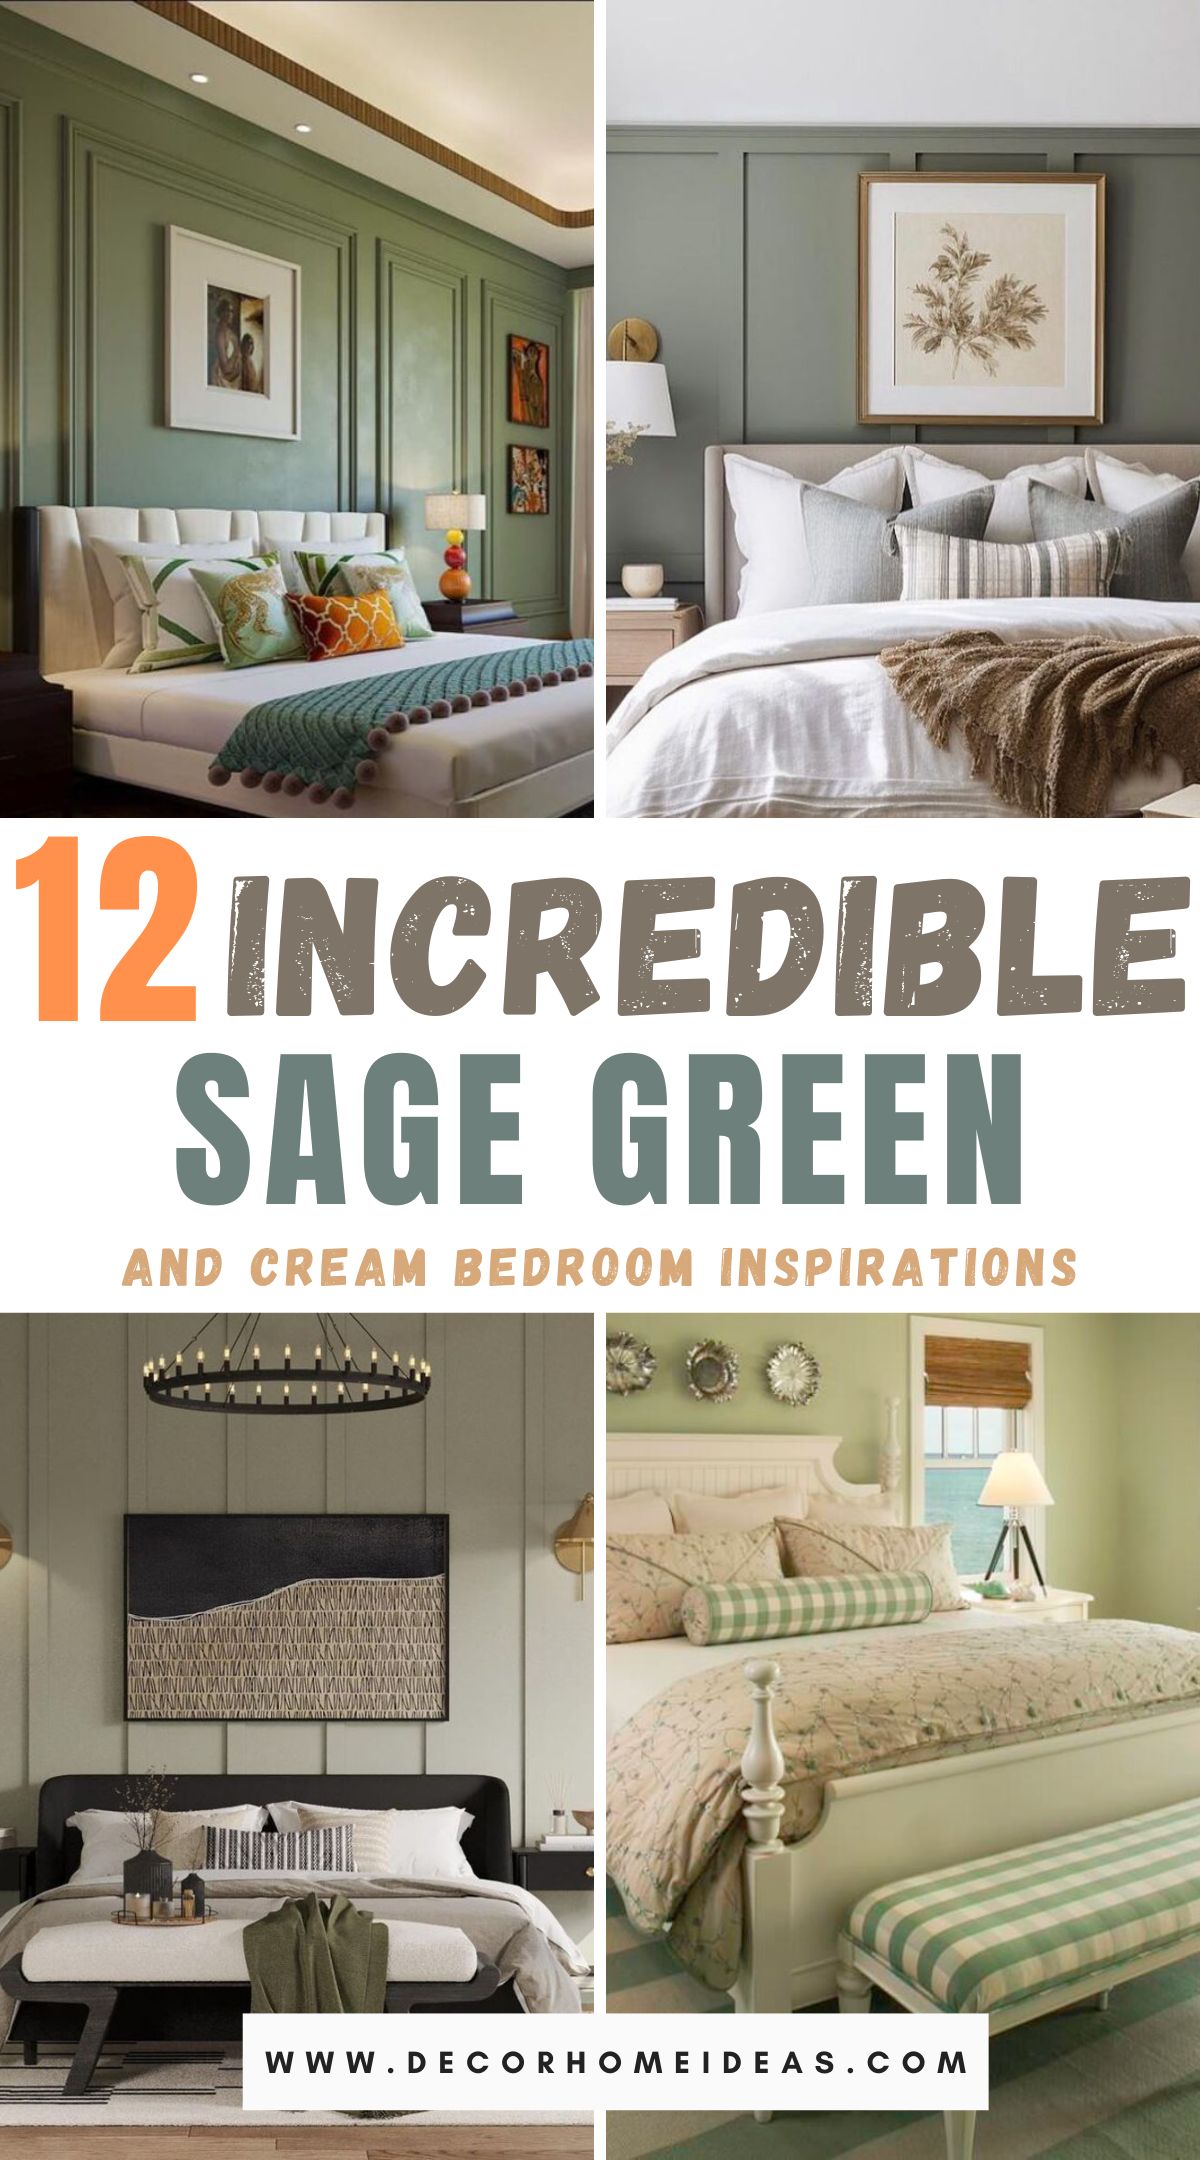 Transform your bedroom into a serene sanctuary with these 12 enchanting sage green and cream inspirations. Explore calming color schemes, cozy textiles, and elegant decor ideas to create a peaceful retreat for rest and relaxation.